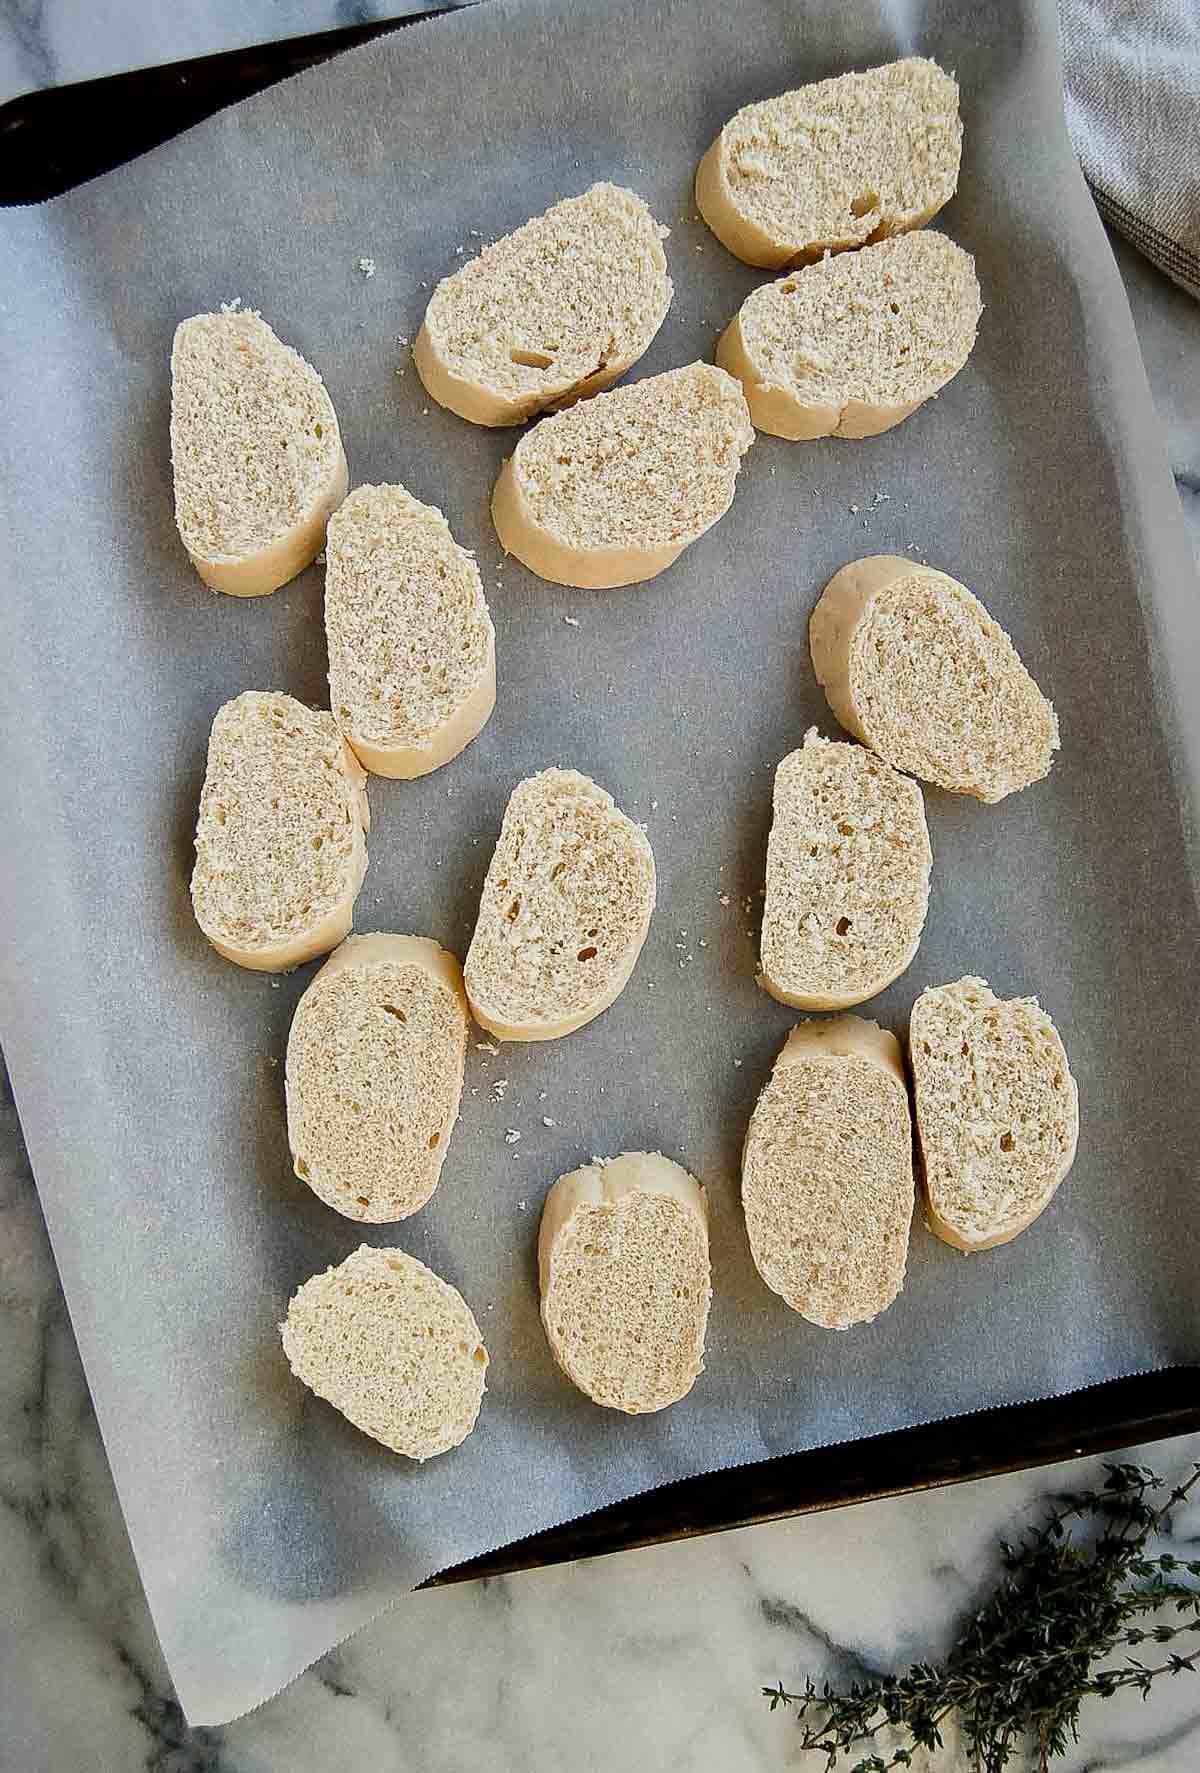 sliced baguette pieces on sheet pan.